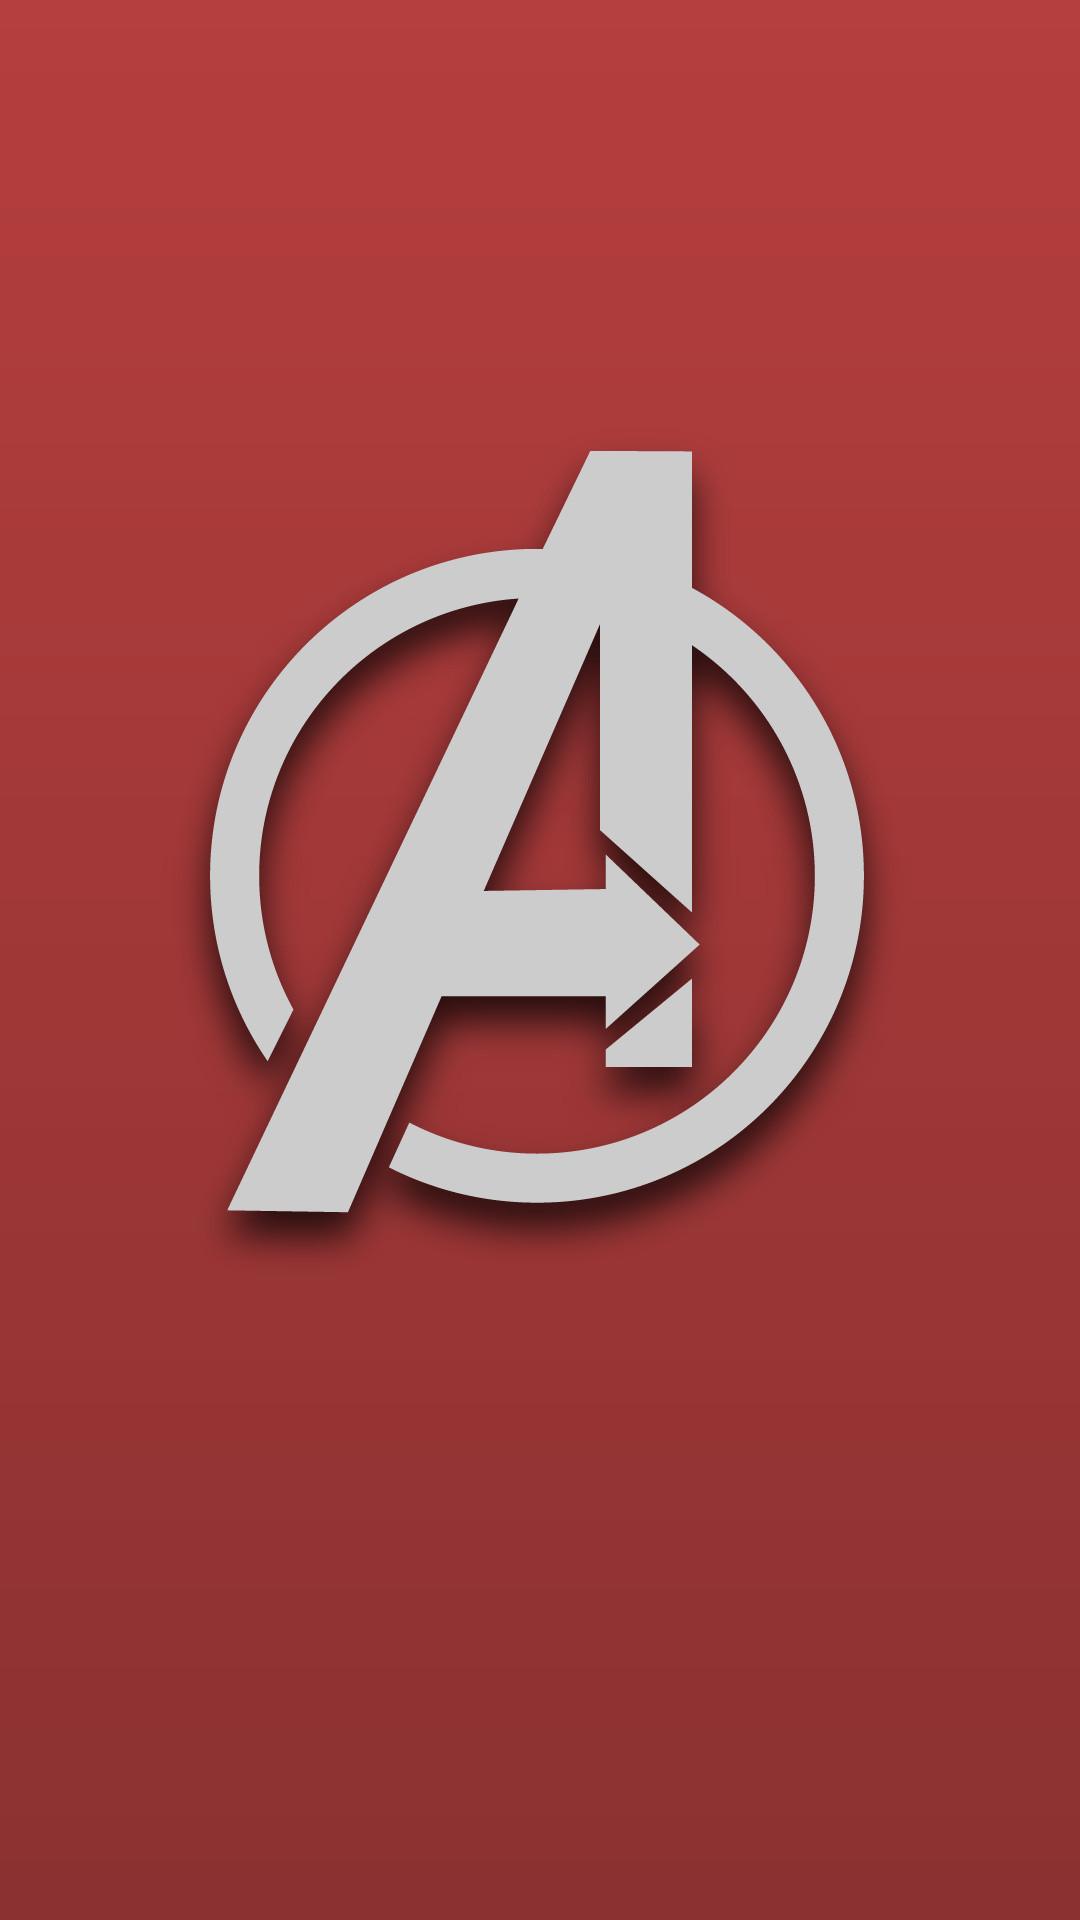 Avengers Wallpaper iPhone, image collections of wallpaper